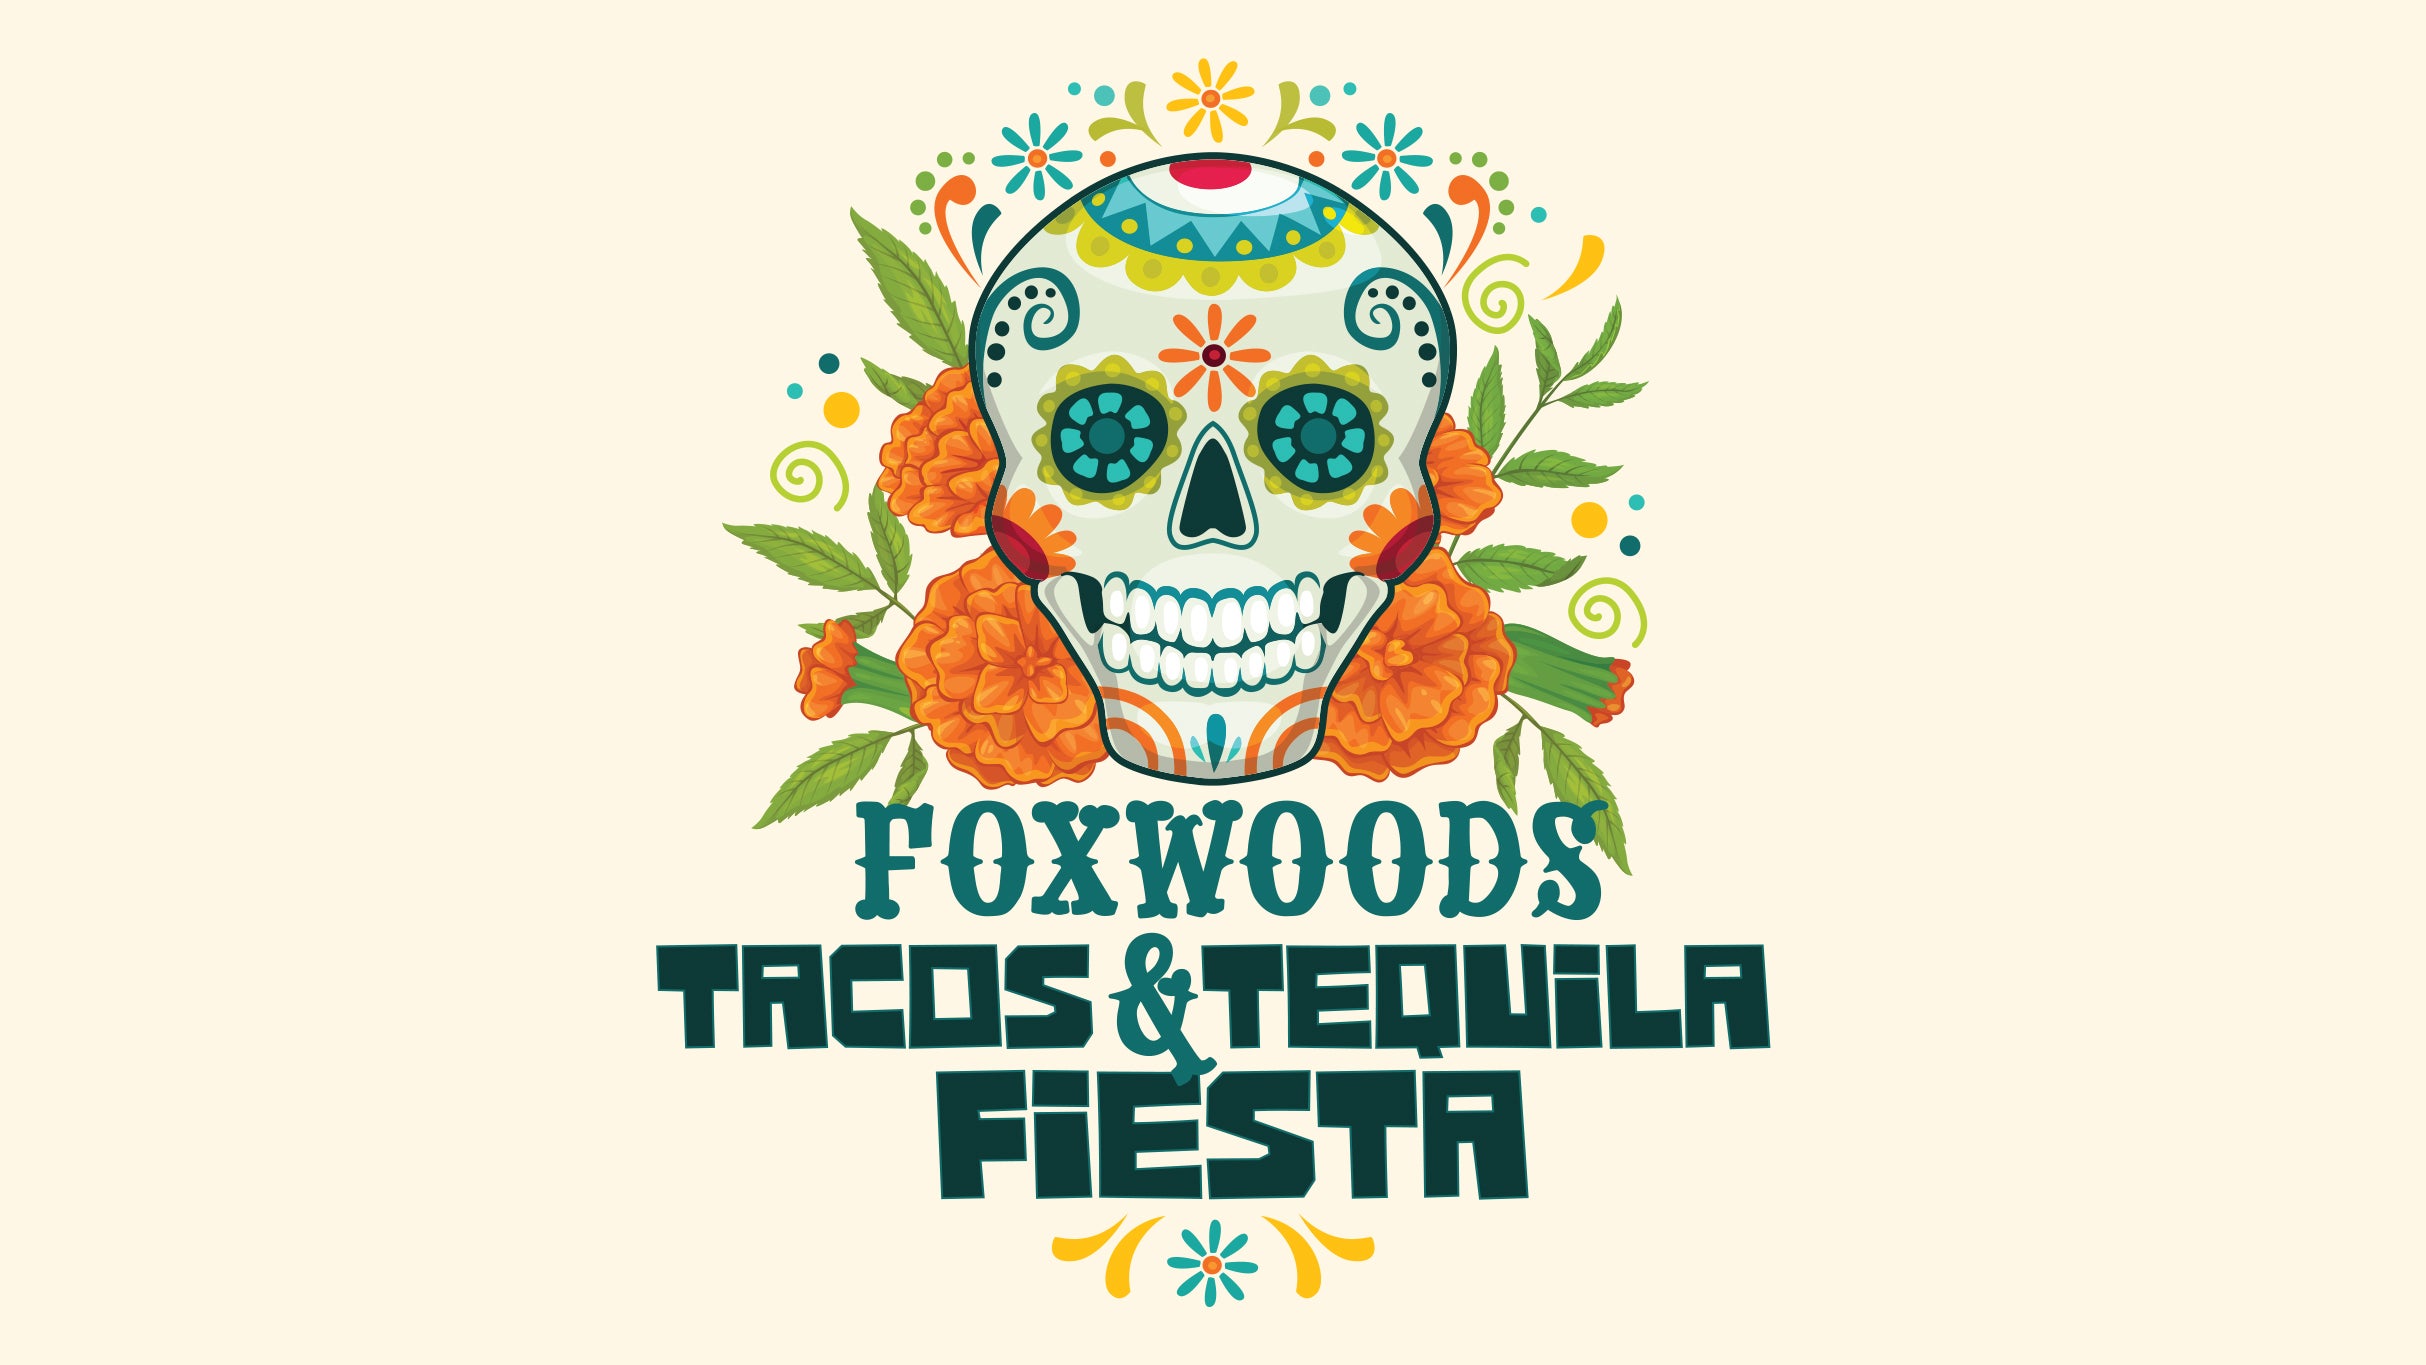 Foxwoods Tacos & Tequila Fiesta in Mashantucket promo photo for Designated Driver presale offer code